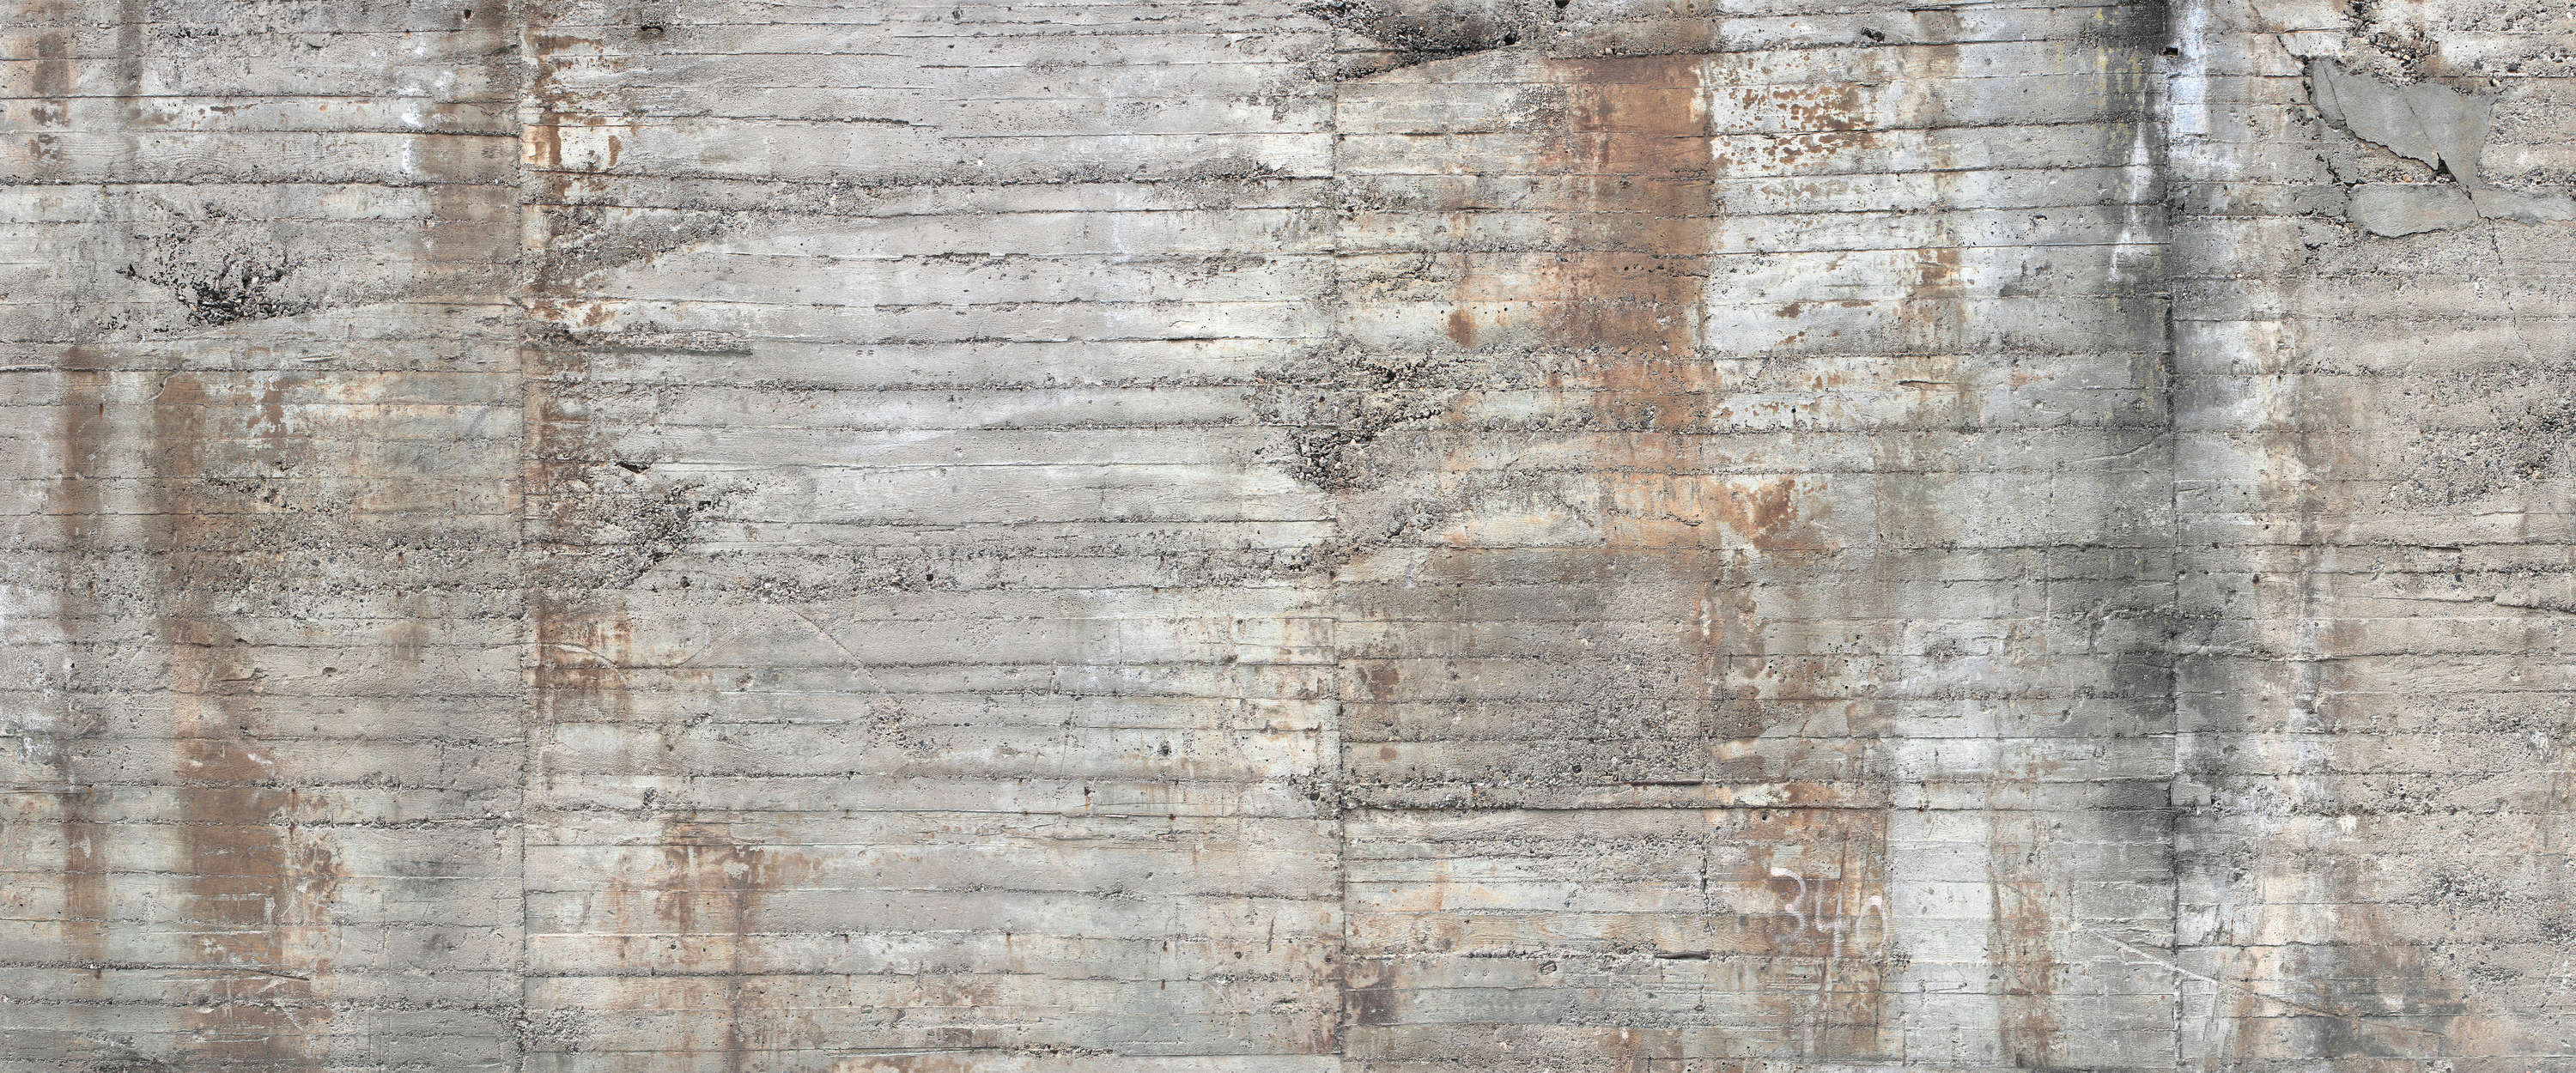             Concrete wall mural rustic reinforced concrete grey brown
        